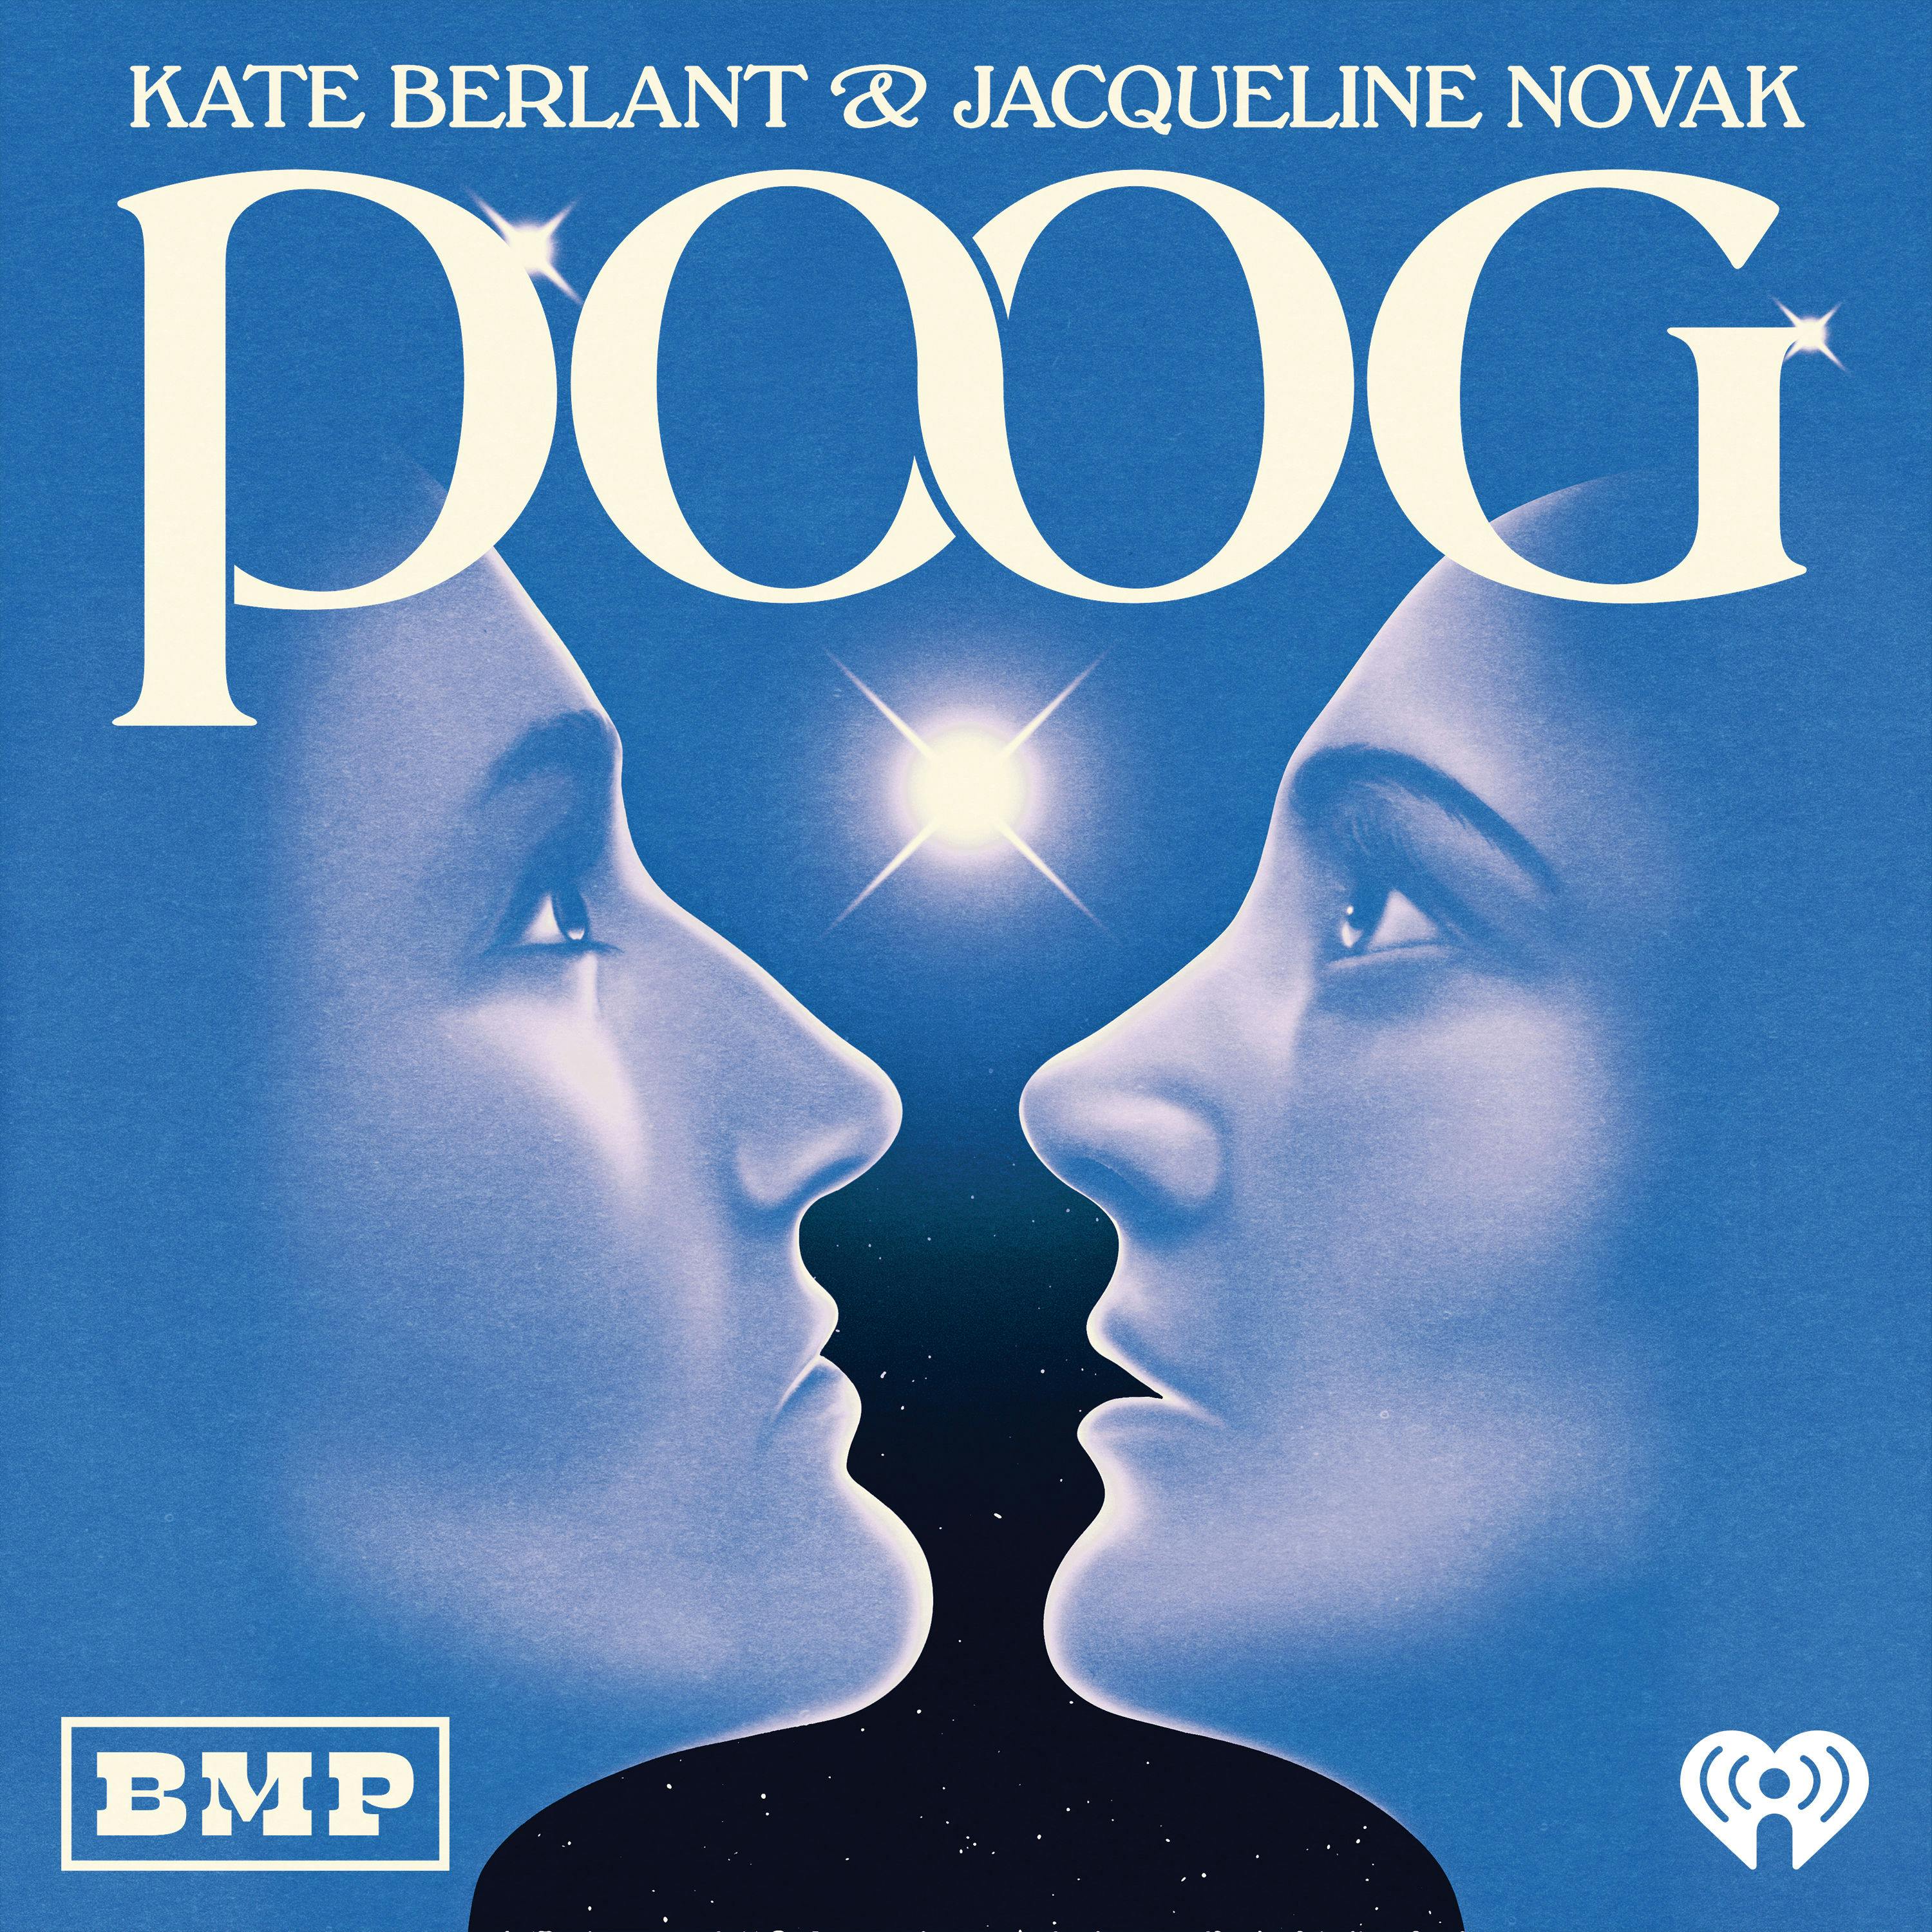 POOG with Kate Berlant and Jacqueline Novak